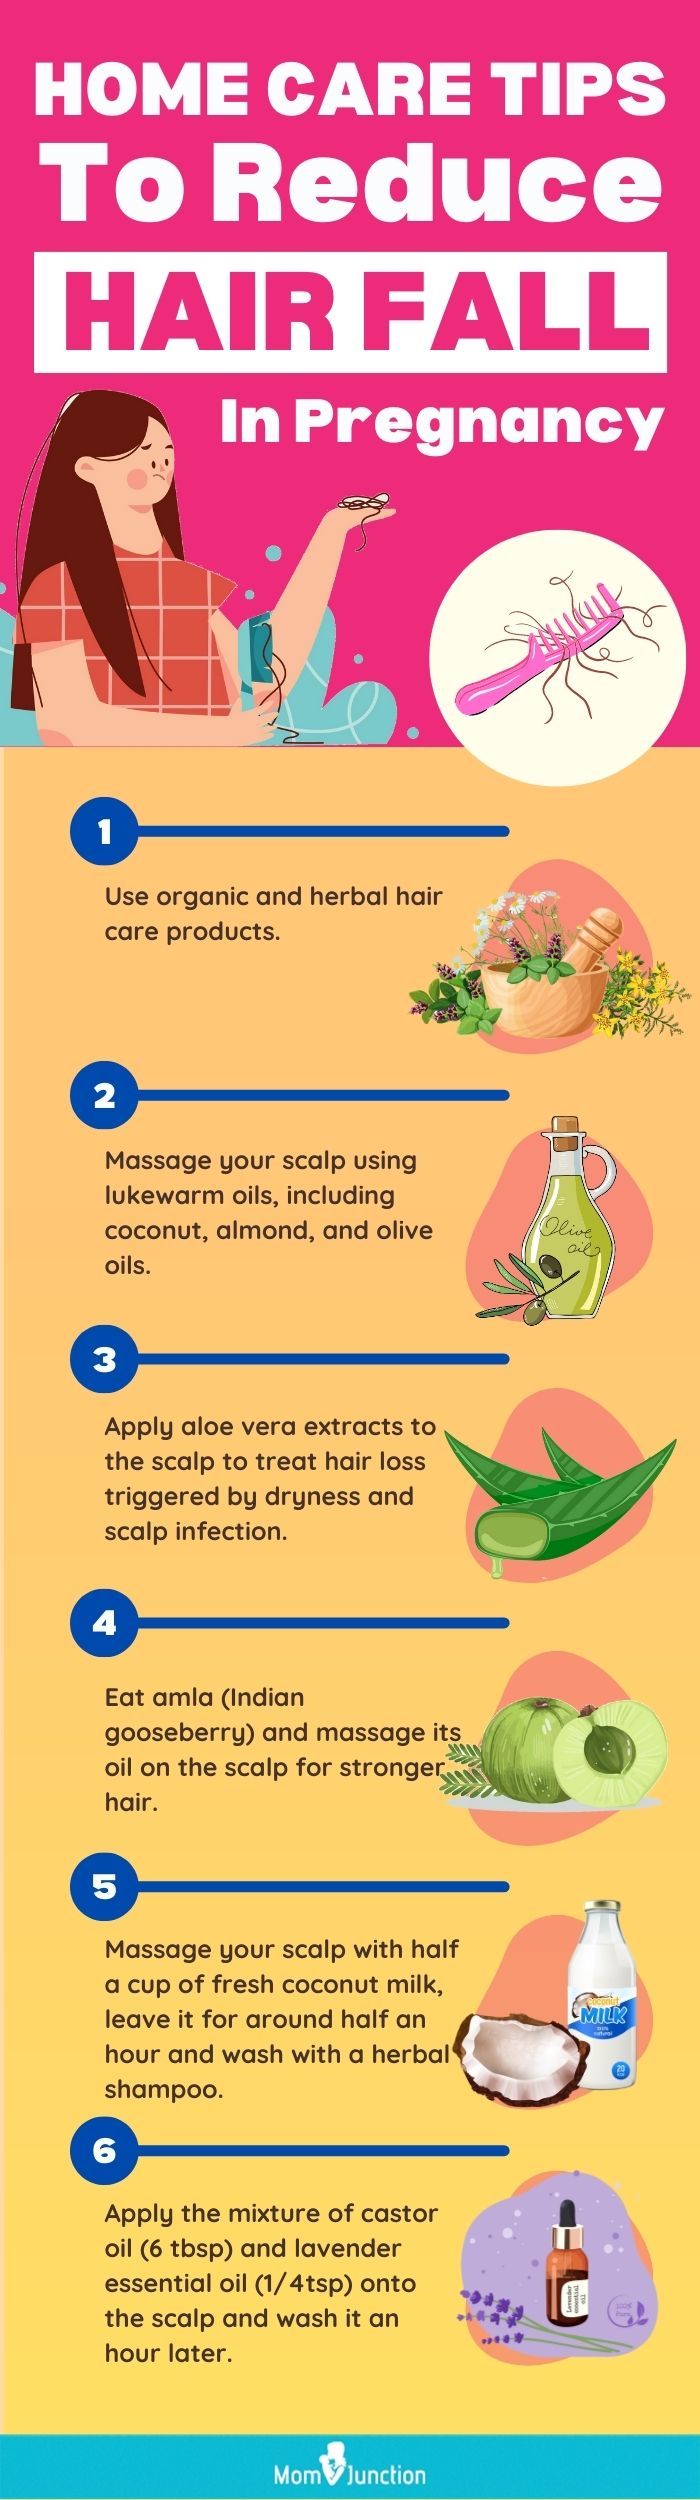 5 Excellent Ayurvedic Tips to Control Hair Fall